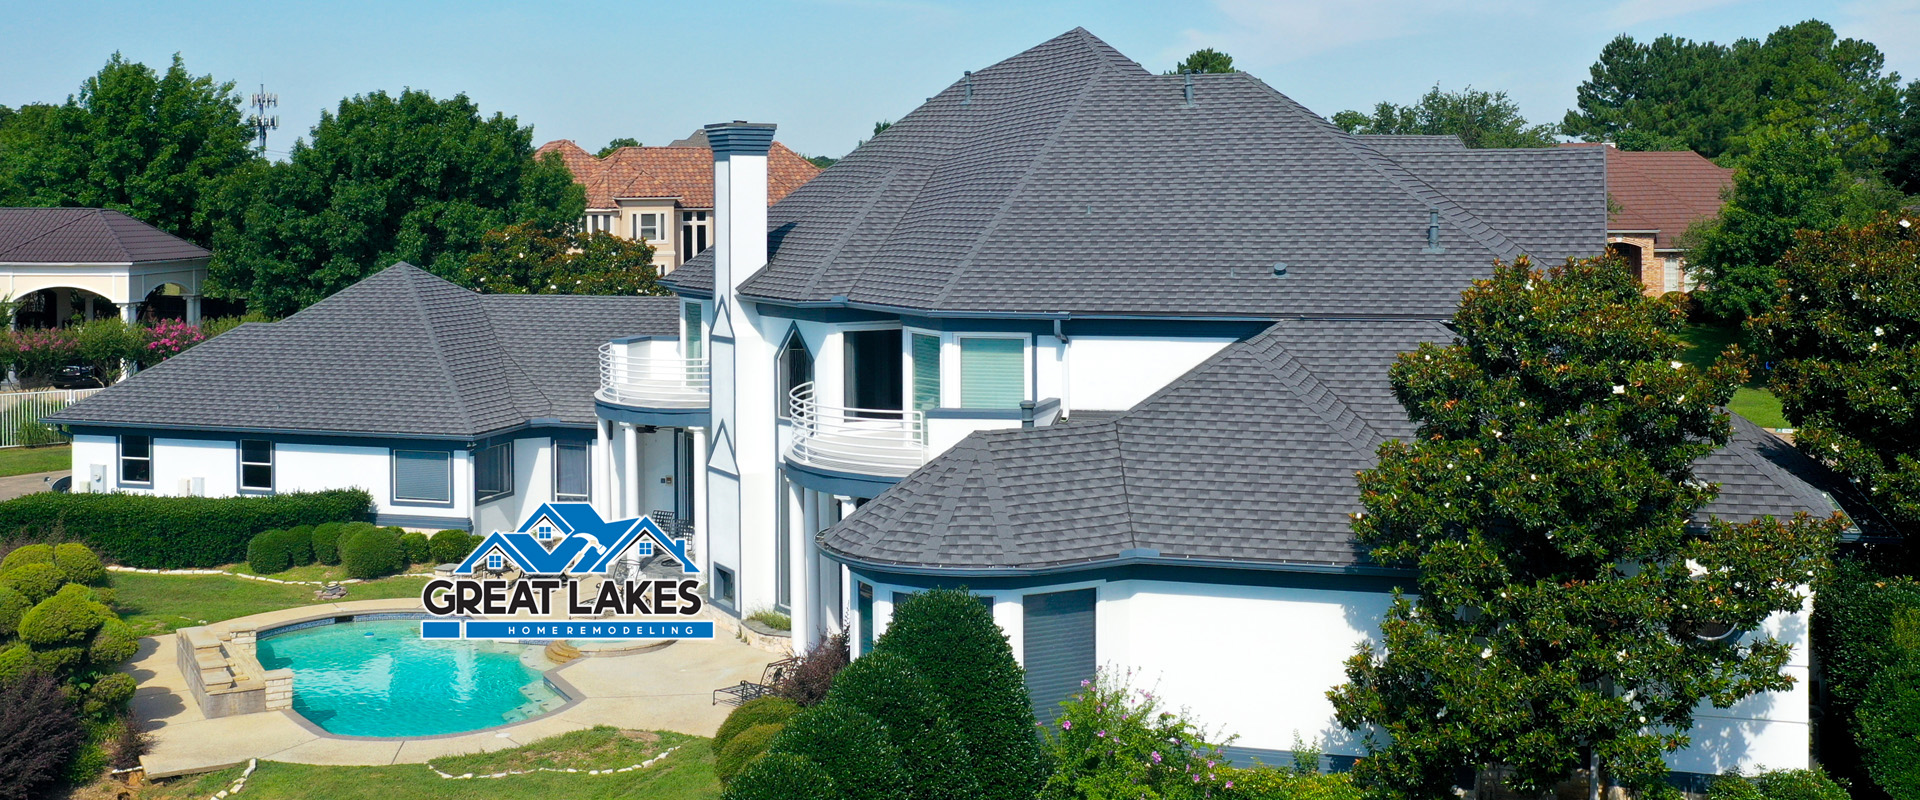 Quality Roofing, Siding and Windows in Ohio, Michigan and Indiana